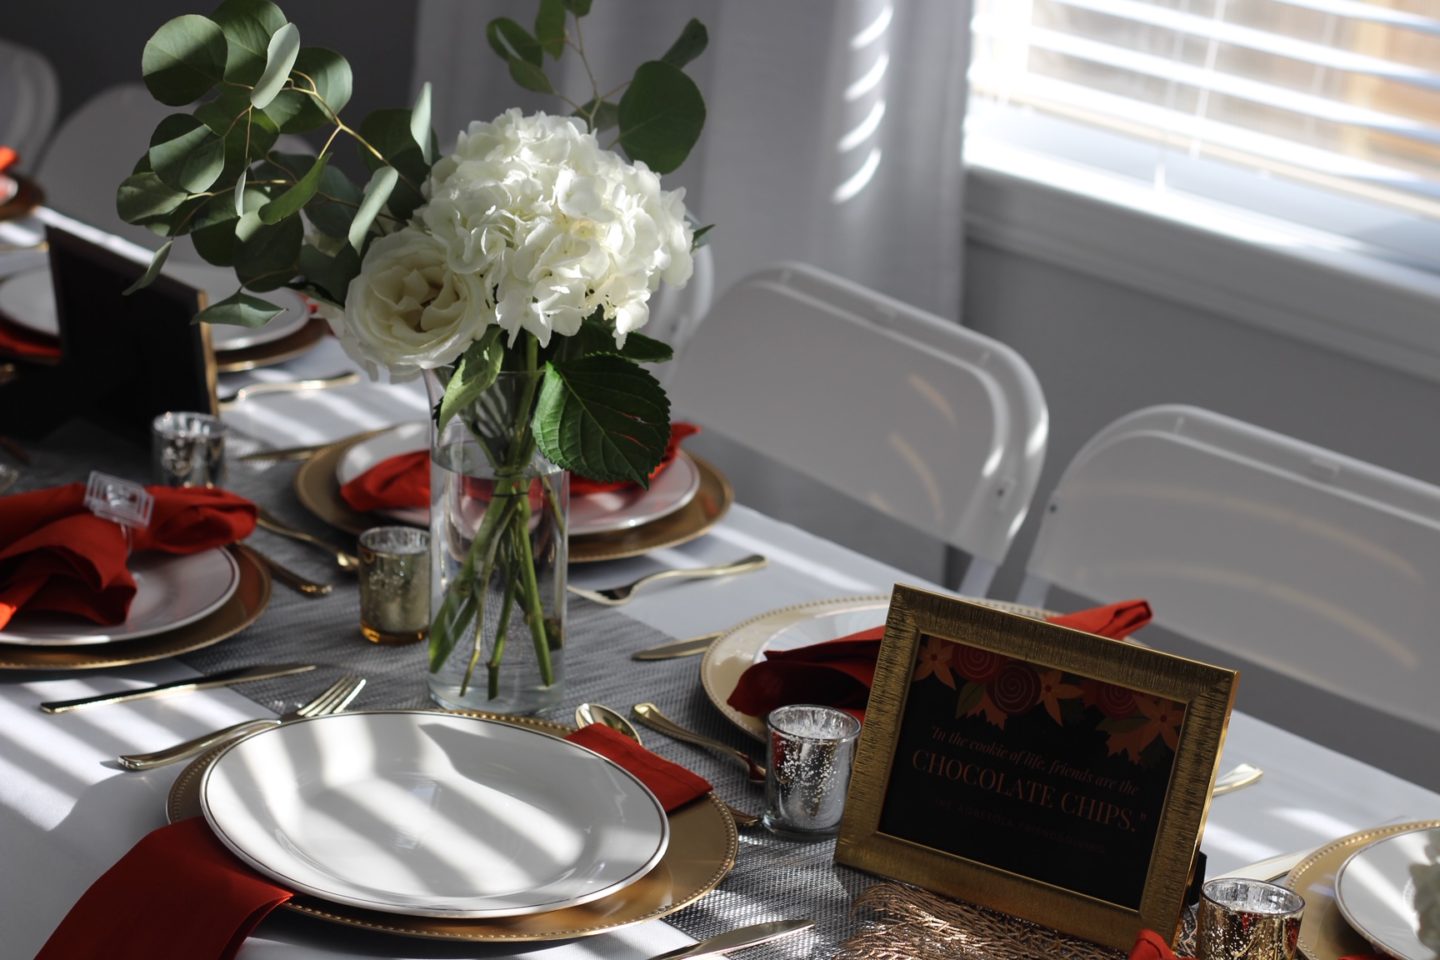 The Agbetola Friendsgiving Details and Decor